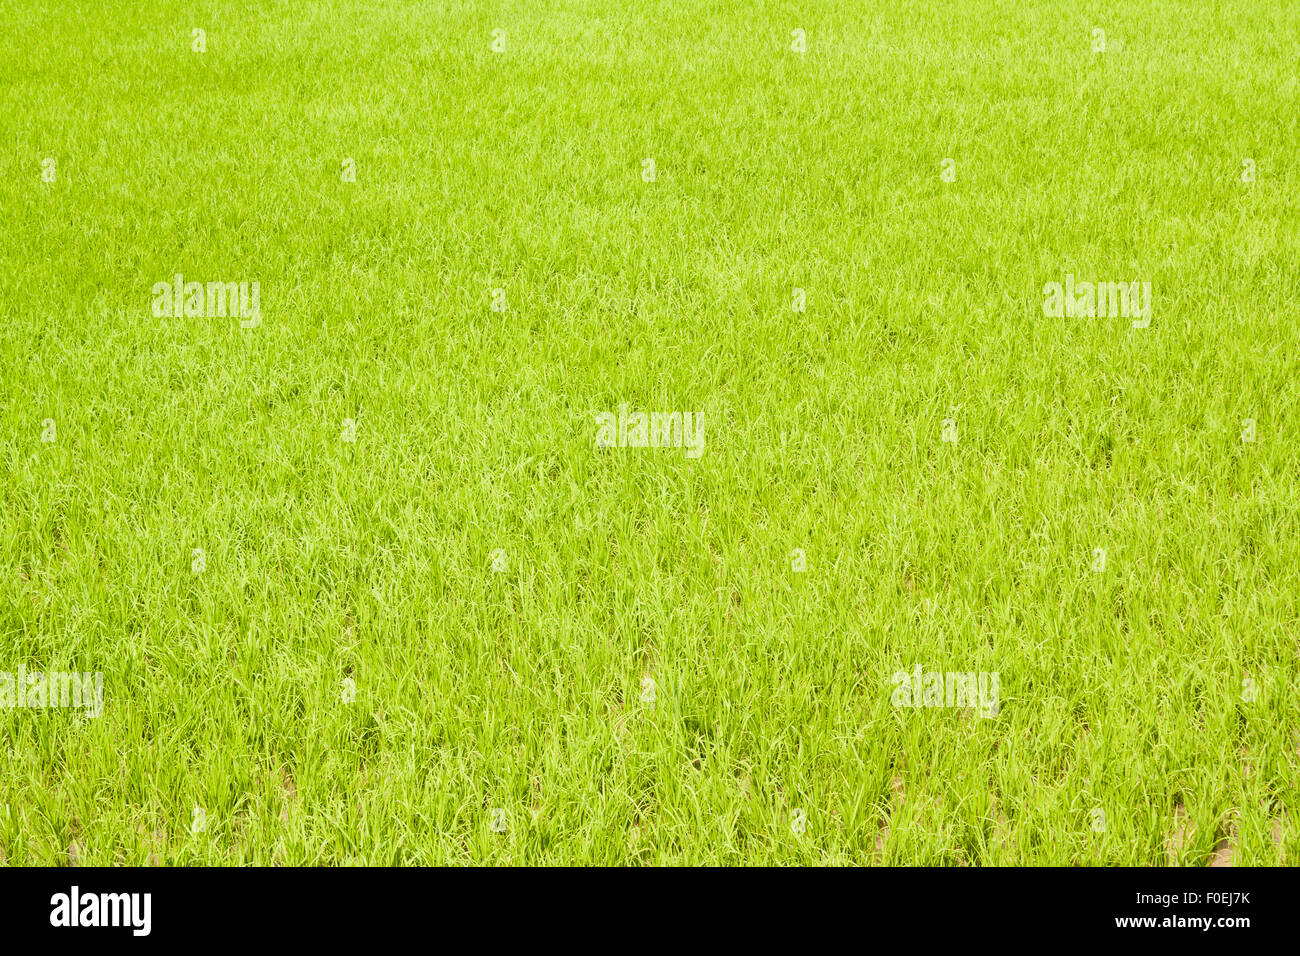 A rice field pictured on a sunny day. The rich green pasture serves as a nice background. Stock Photo